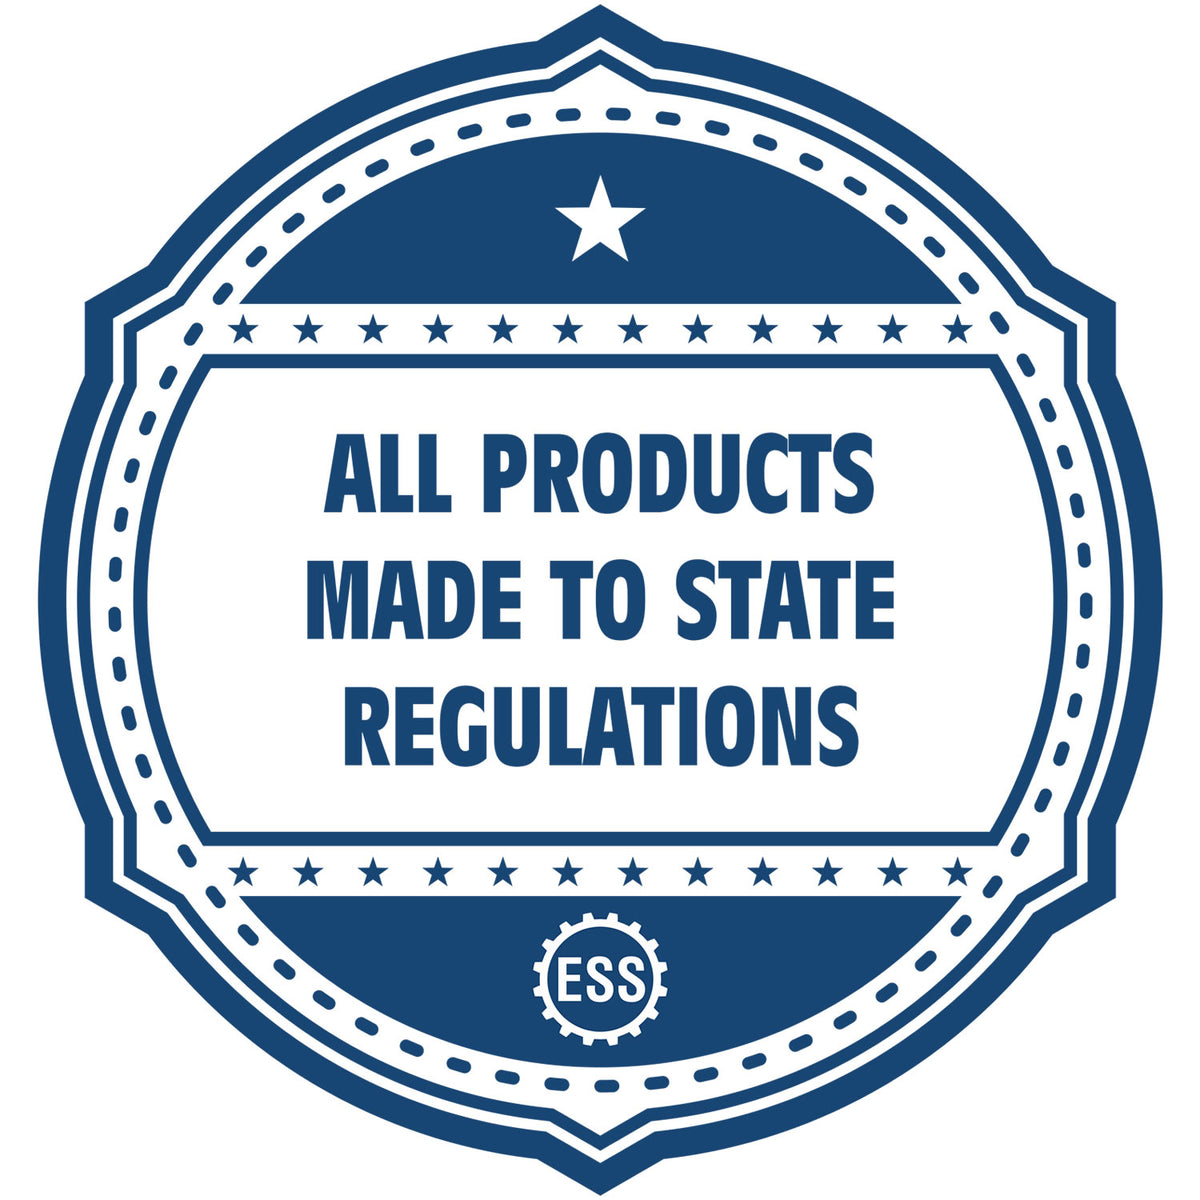 An icon or badge element for the Extended Long Reach Texas Architect Seal Embosser showing that this product is made in compliance with state regulations.